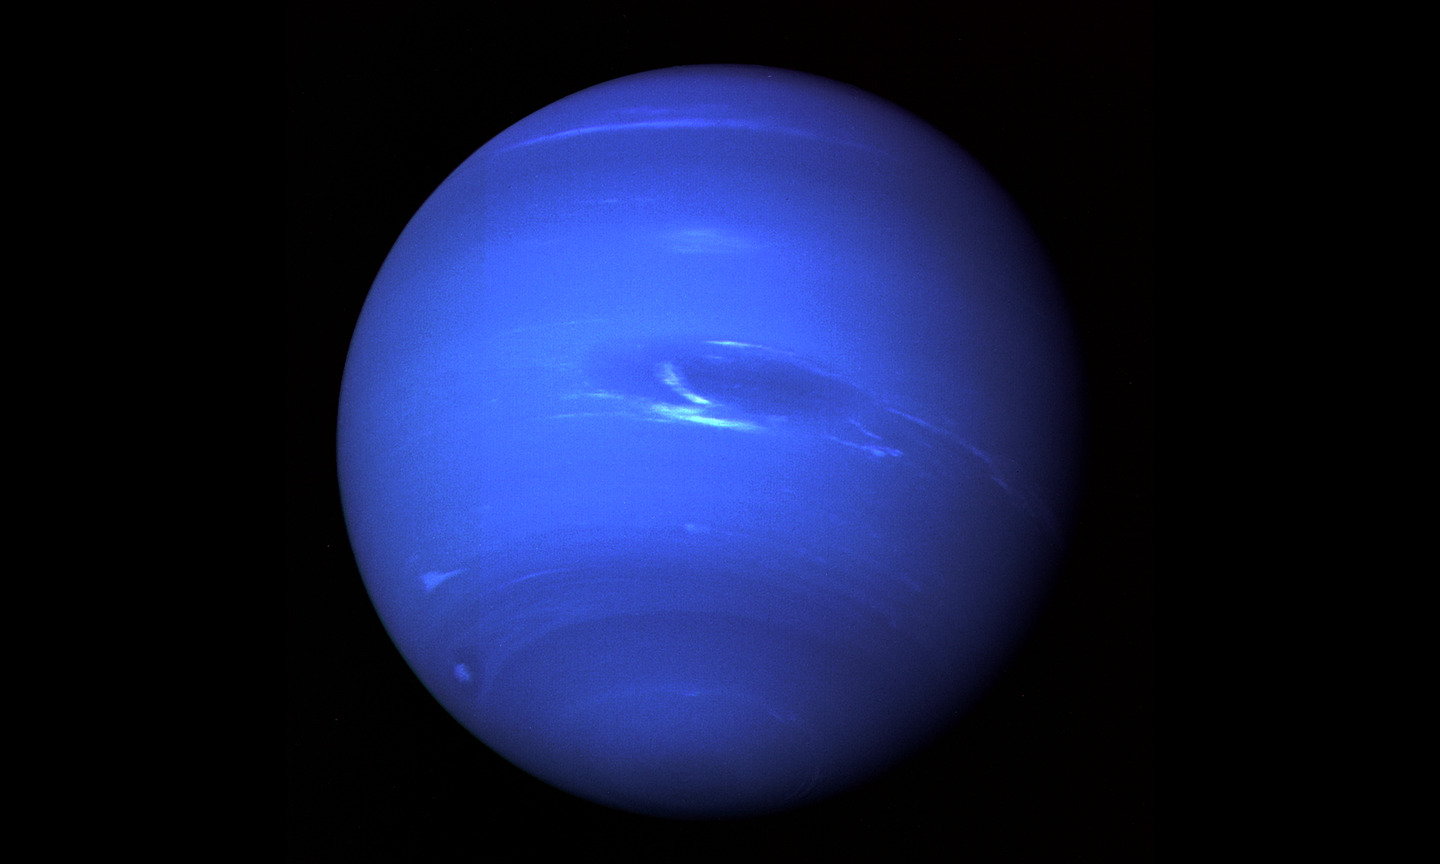 a blue planet with light patches showing interesting patterns in the clouds and atmosphere